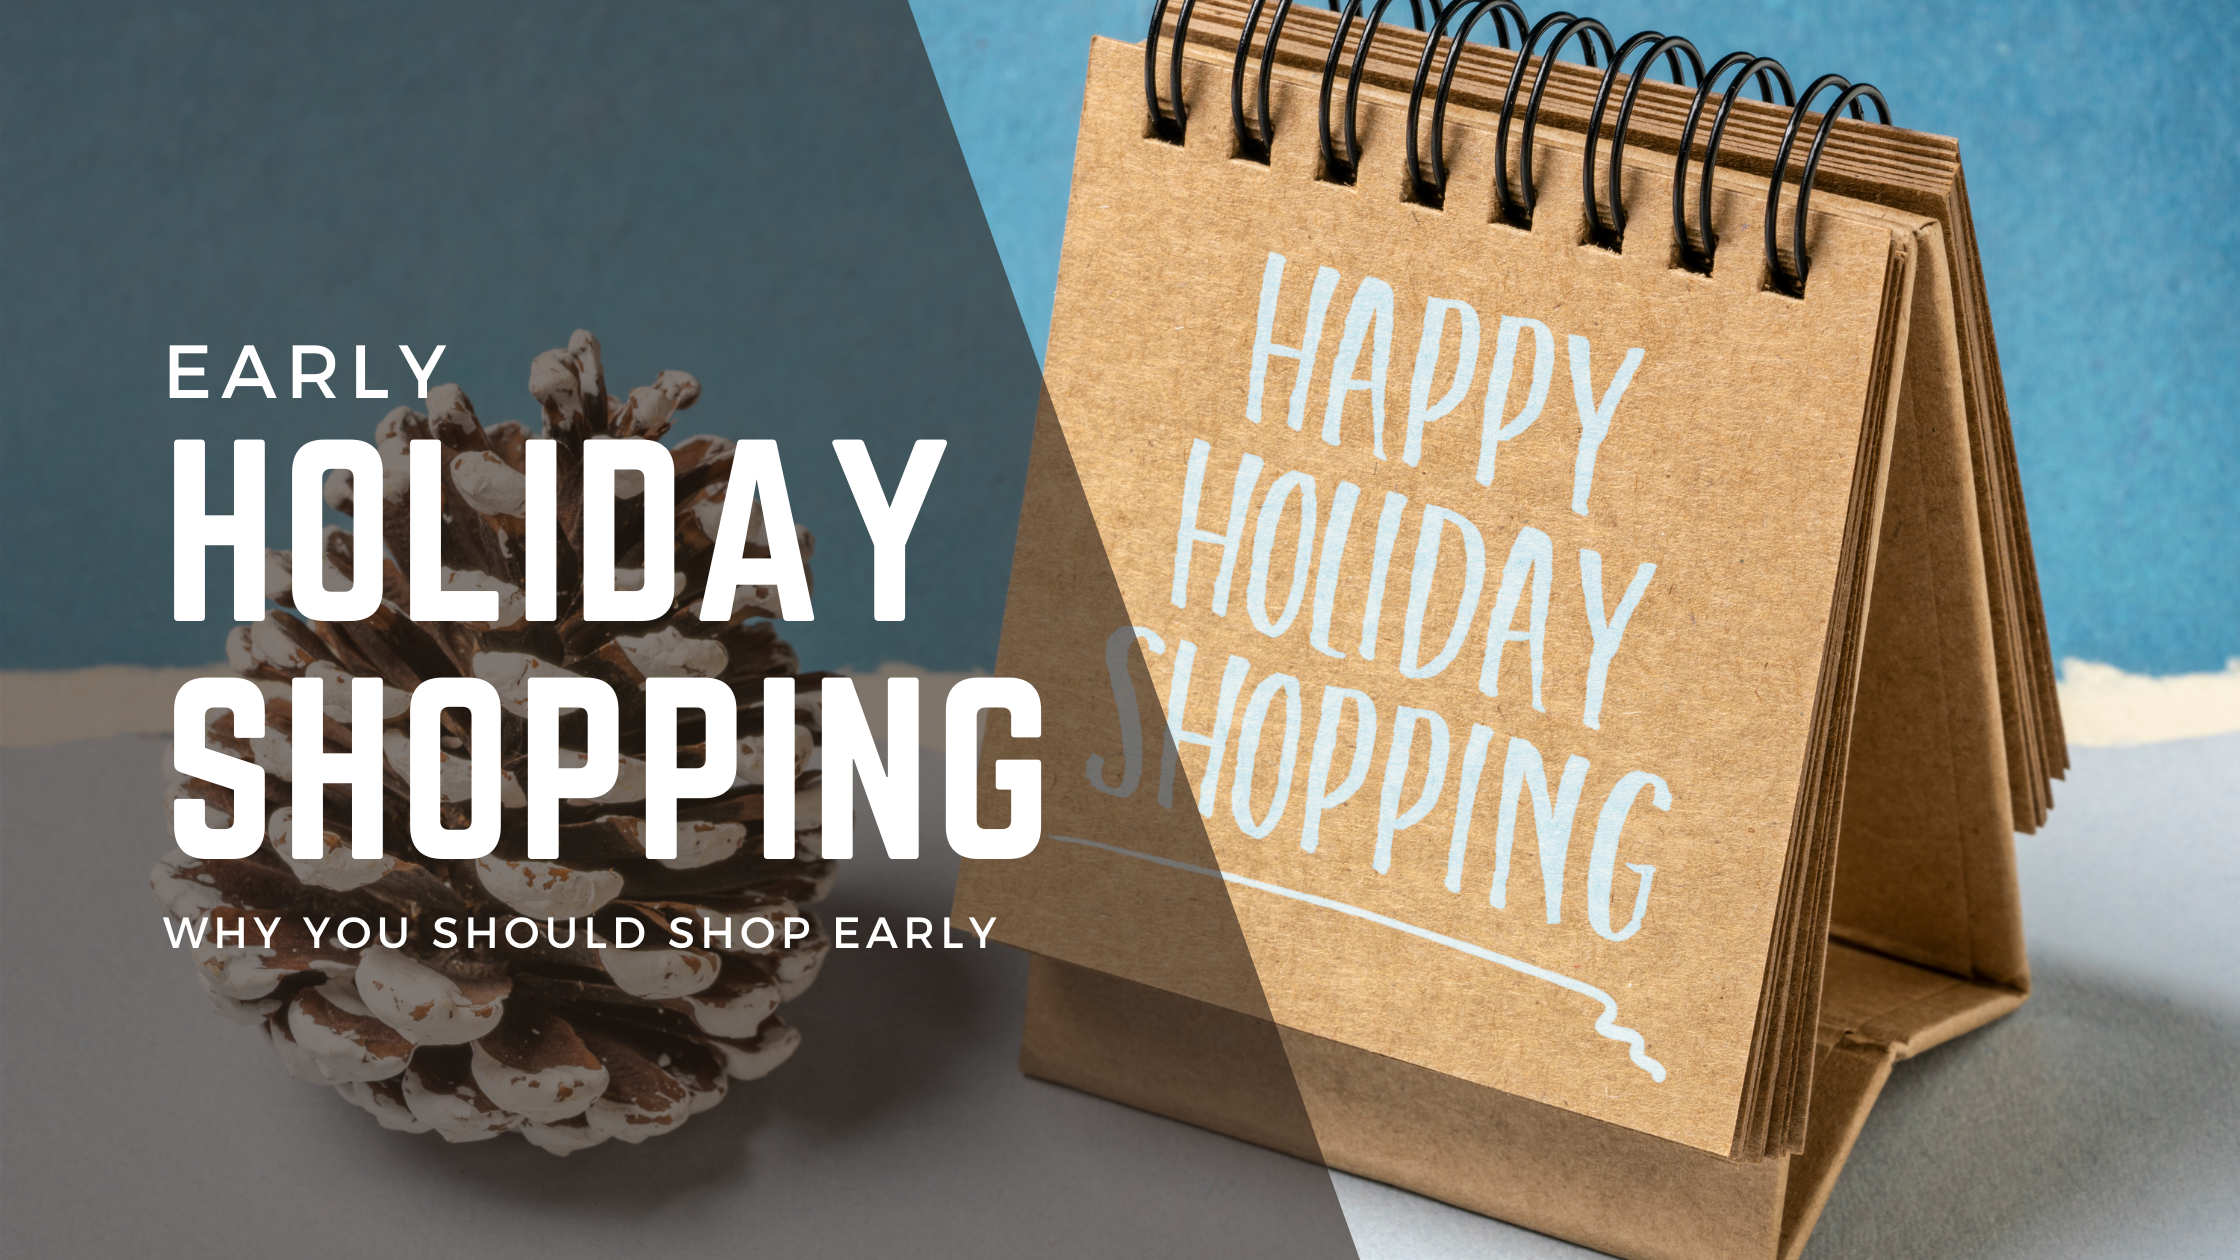 Tis The Season for Holiday Shopping: Why you should shop early